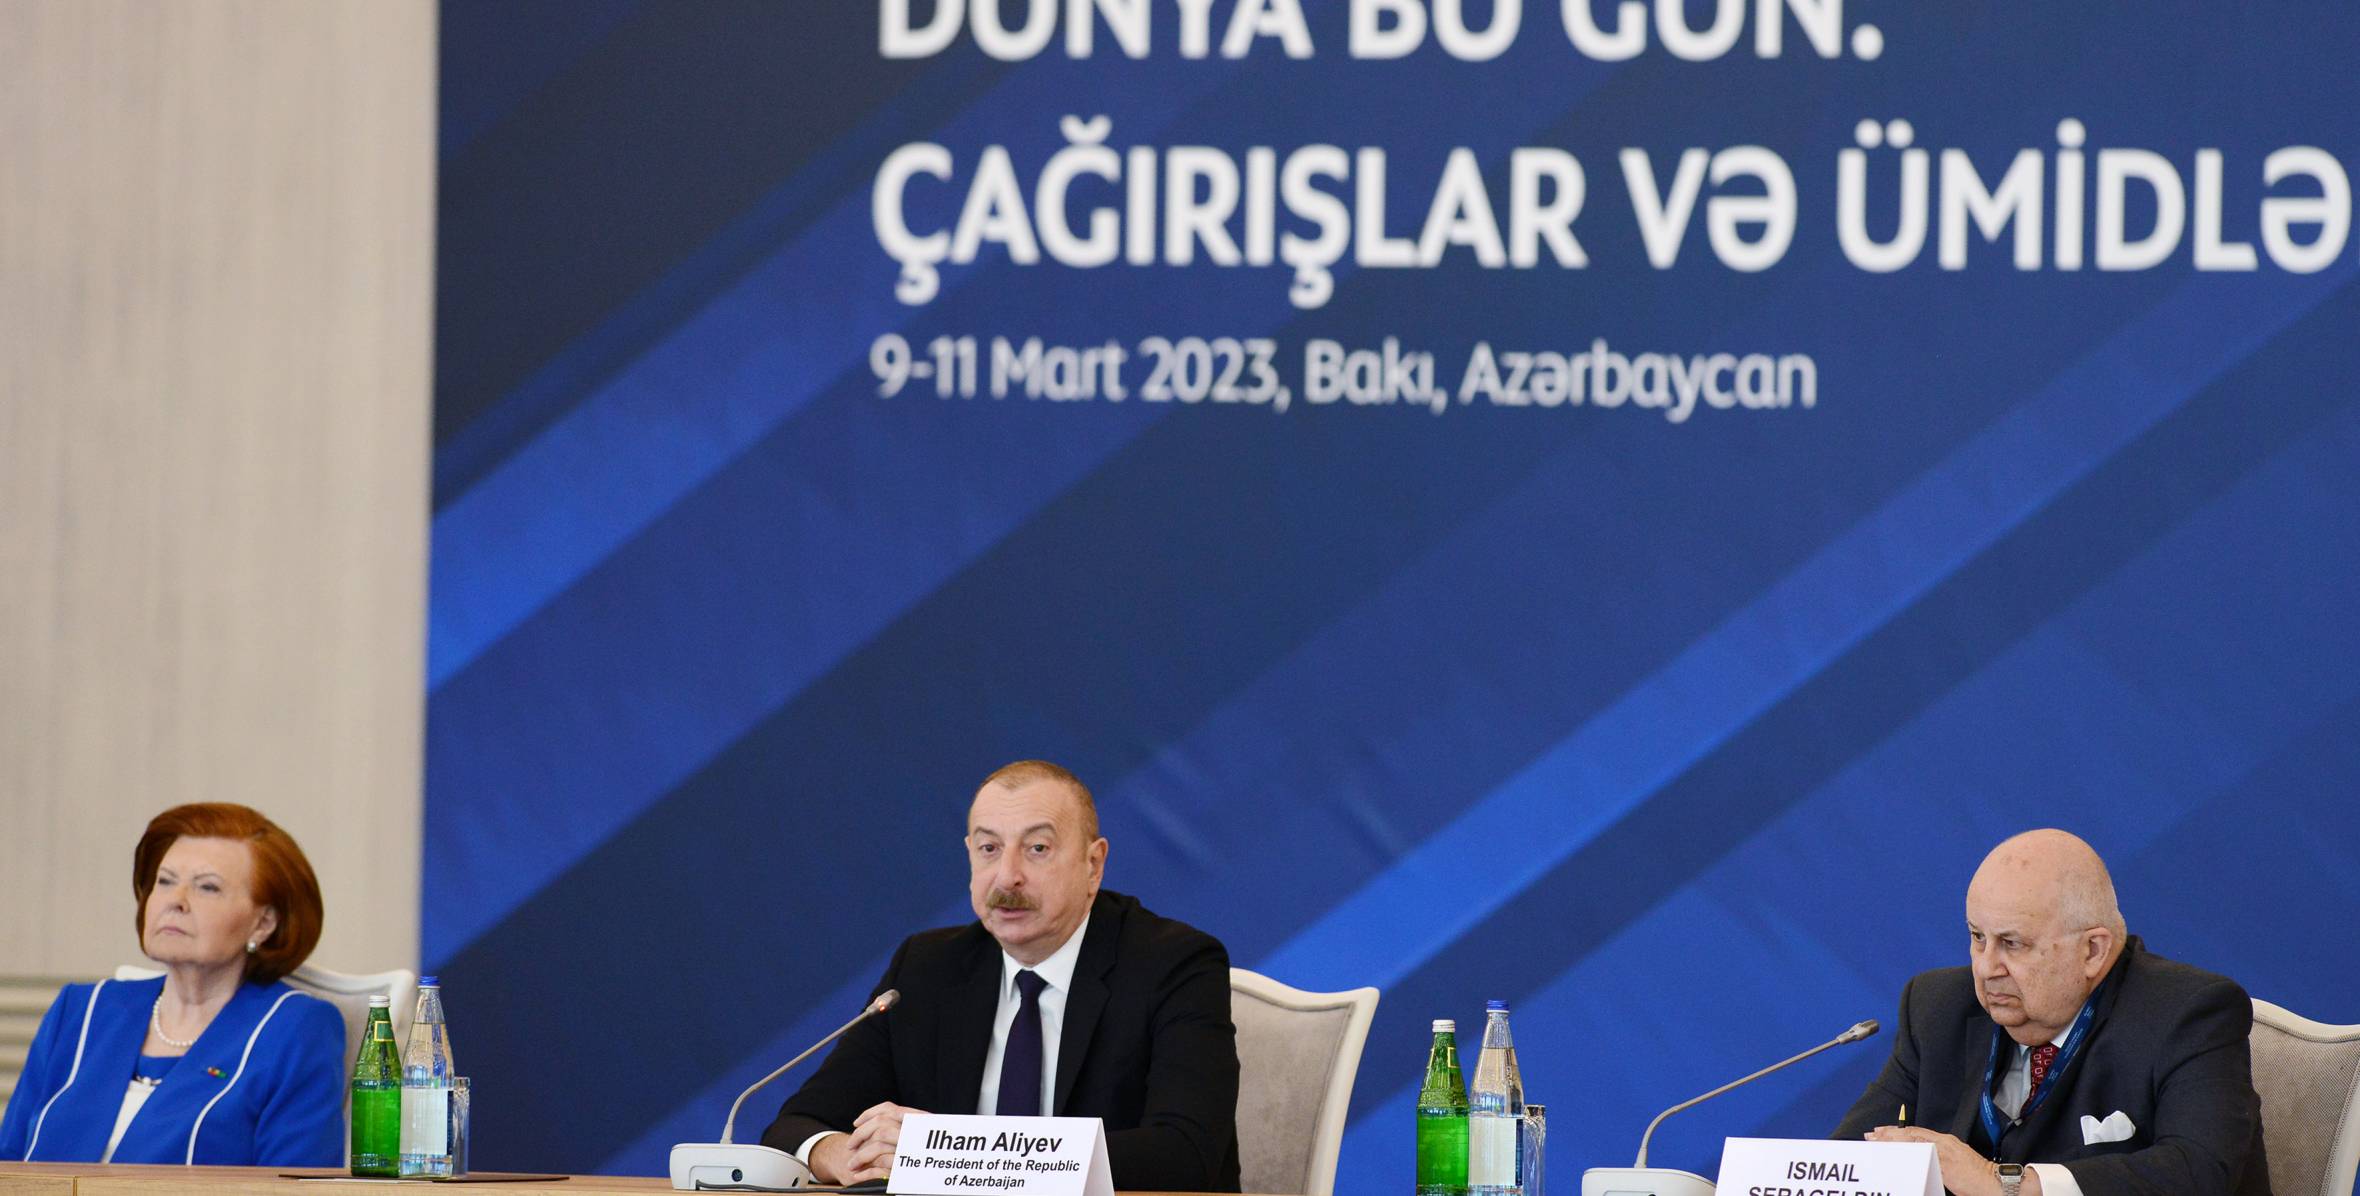 Ilham Aliyev attended the opening ceremony of the 10th Global Baku Forum